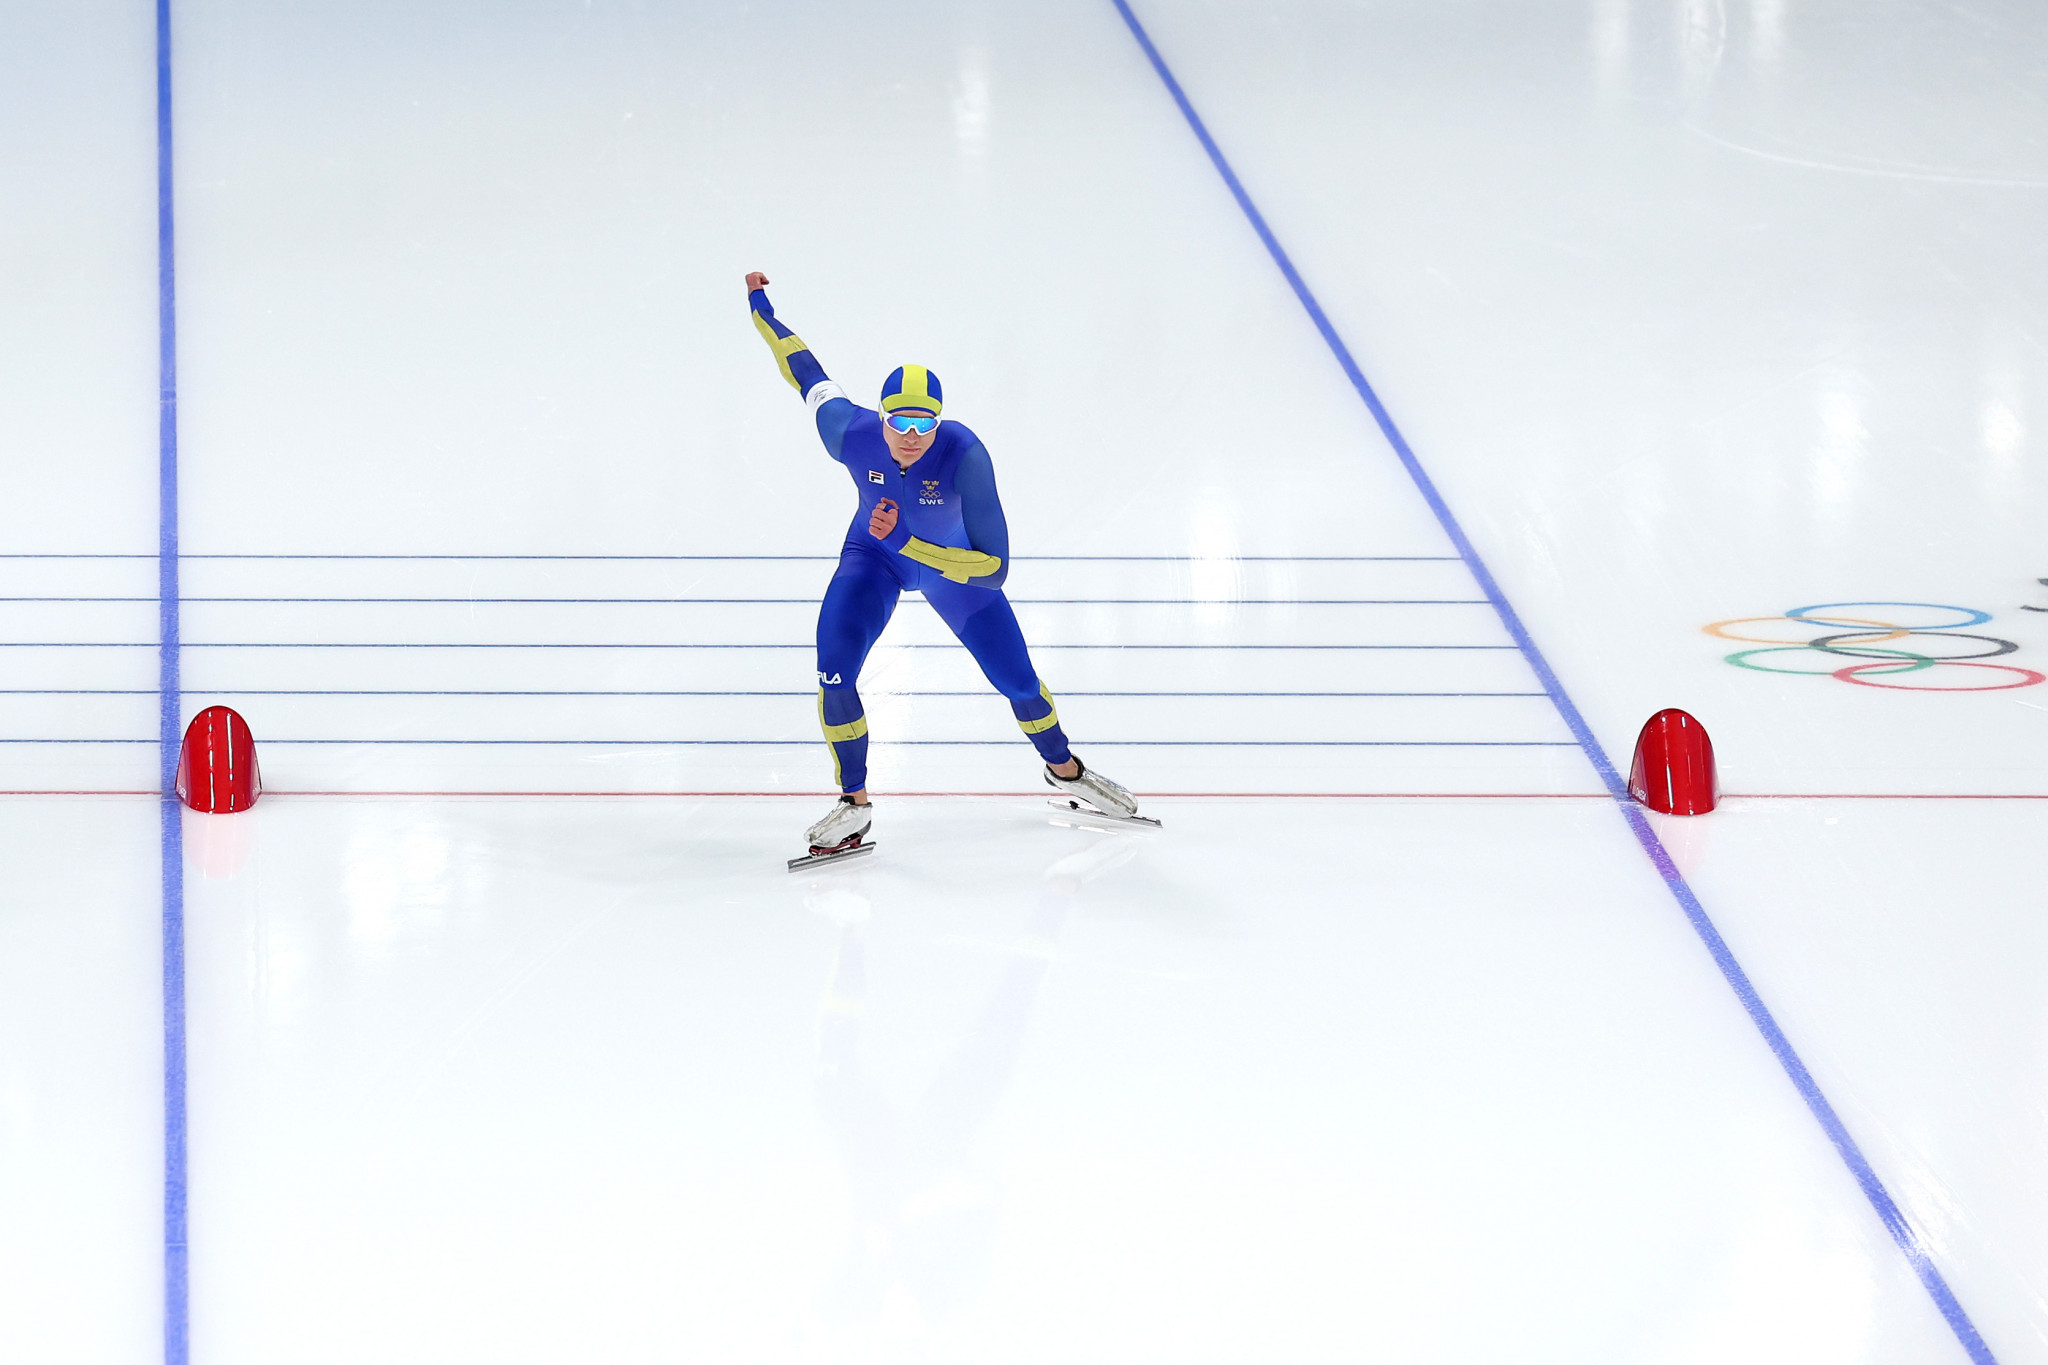 Nils Van Der Poel of Sweden won gold in the men's 10,000 metres speed skating event, setting a world record in the process ©Getty Images